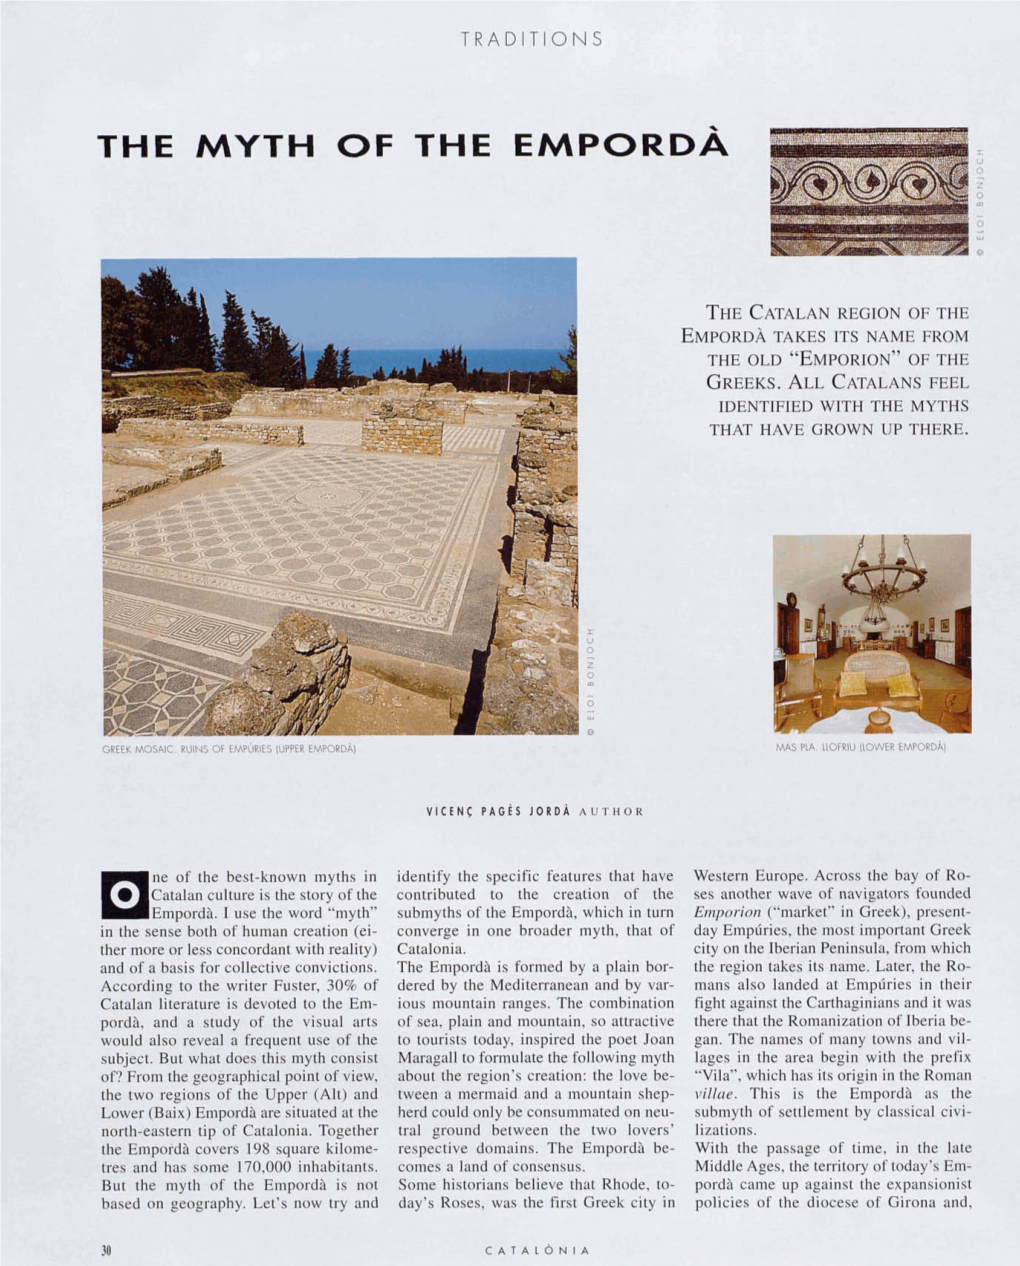 The Old "Emporion" Of